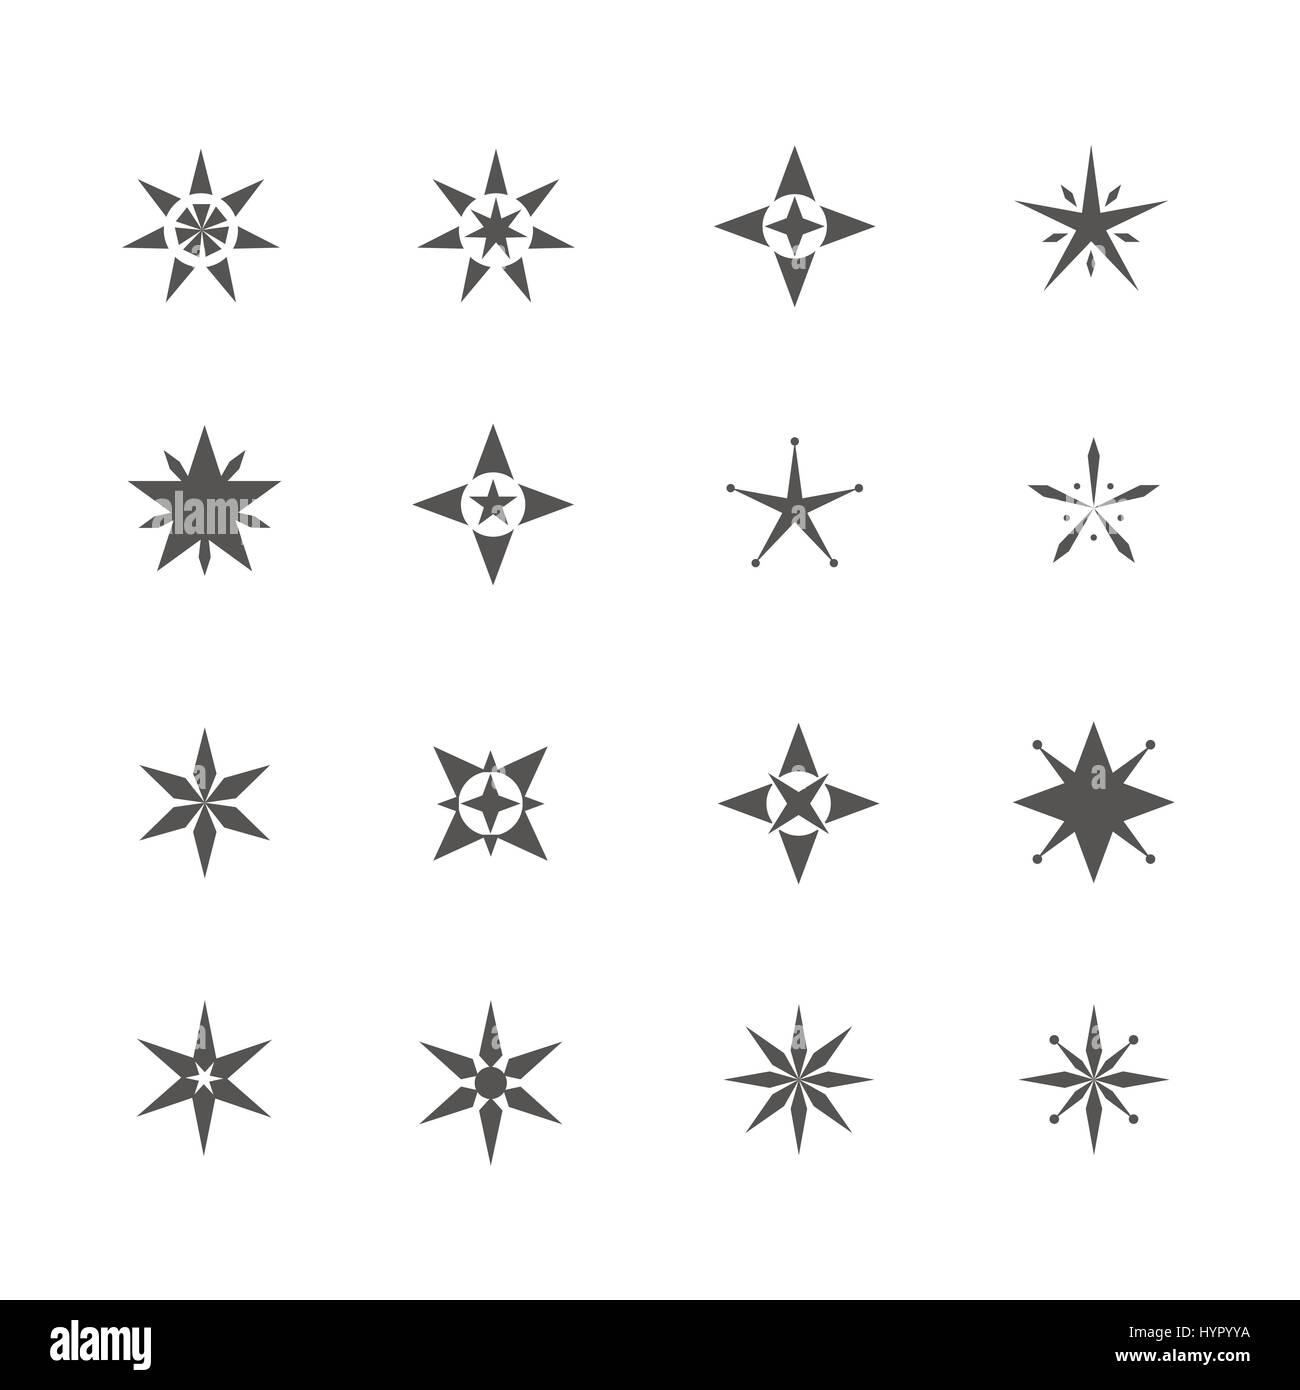 Star shape icons Stock Vector